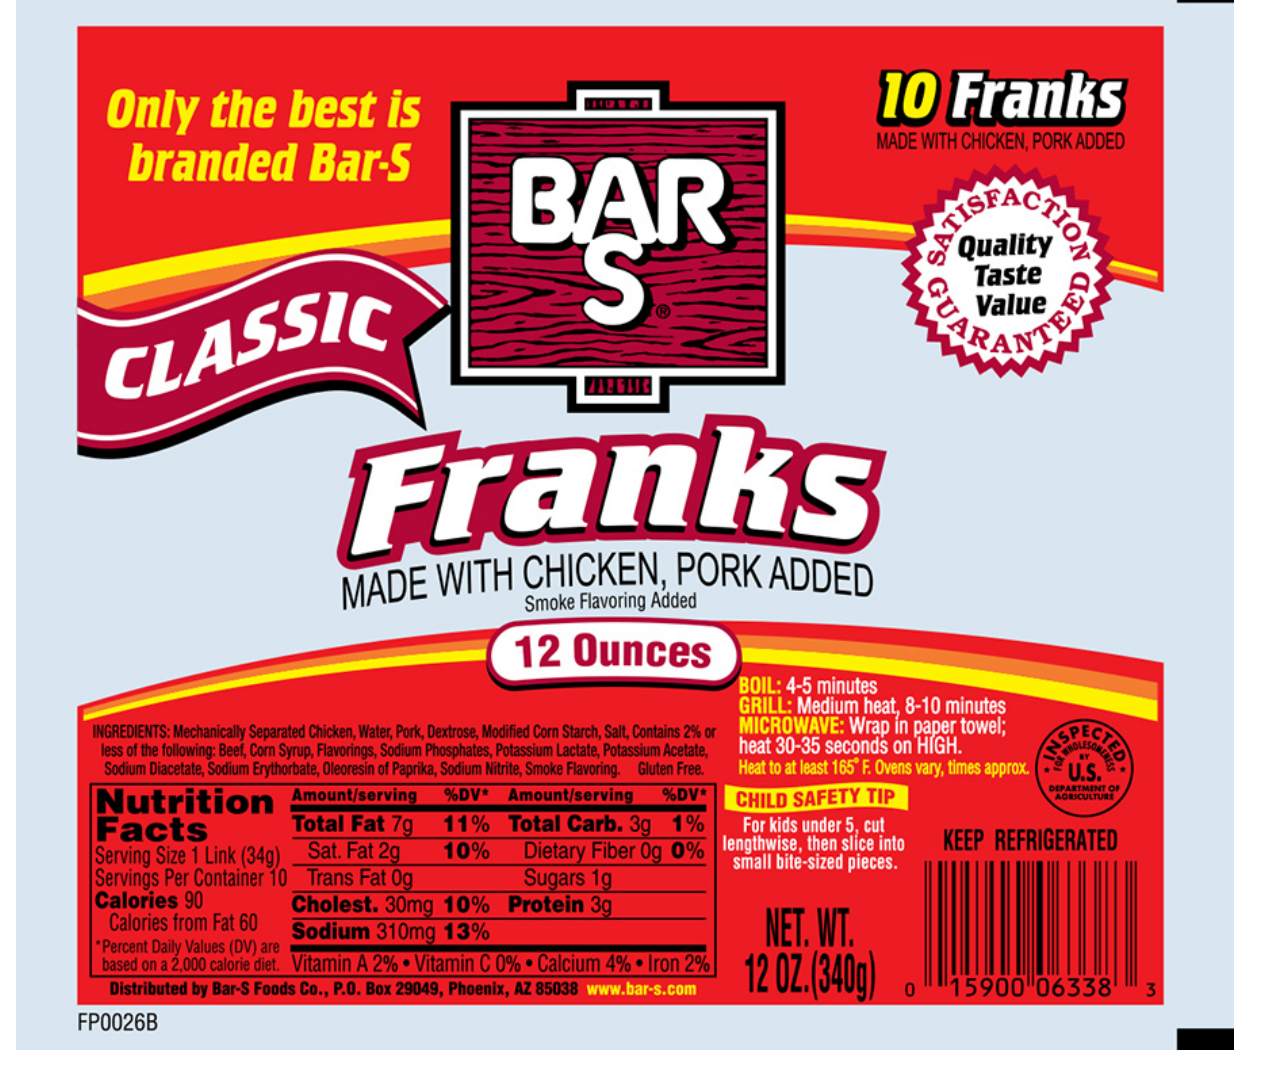 Bar-S Recalls 186 Tons Of Hot Dogs And Corn Dogs For Possible Listeria Contamination